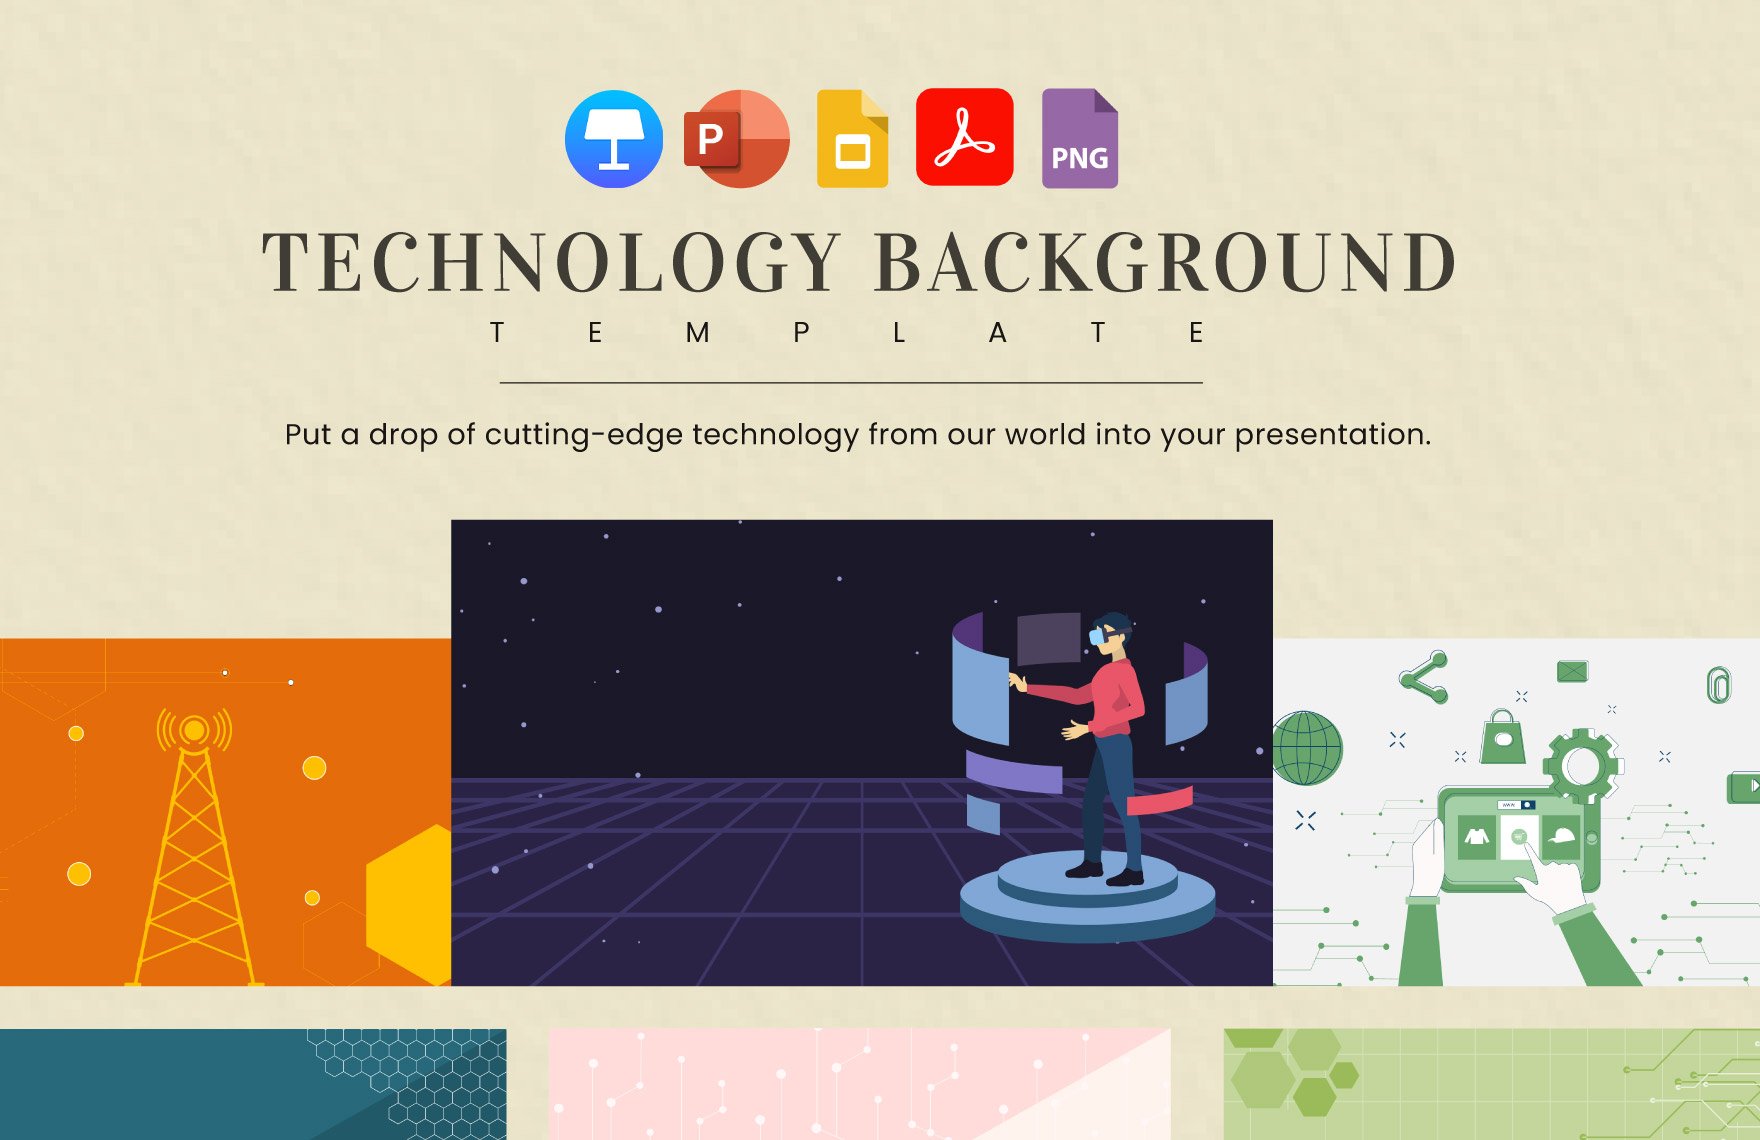 Technology Background Template